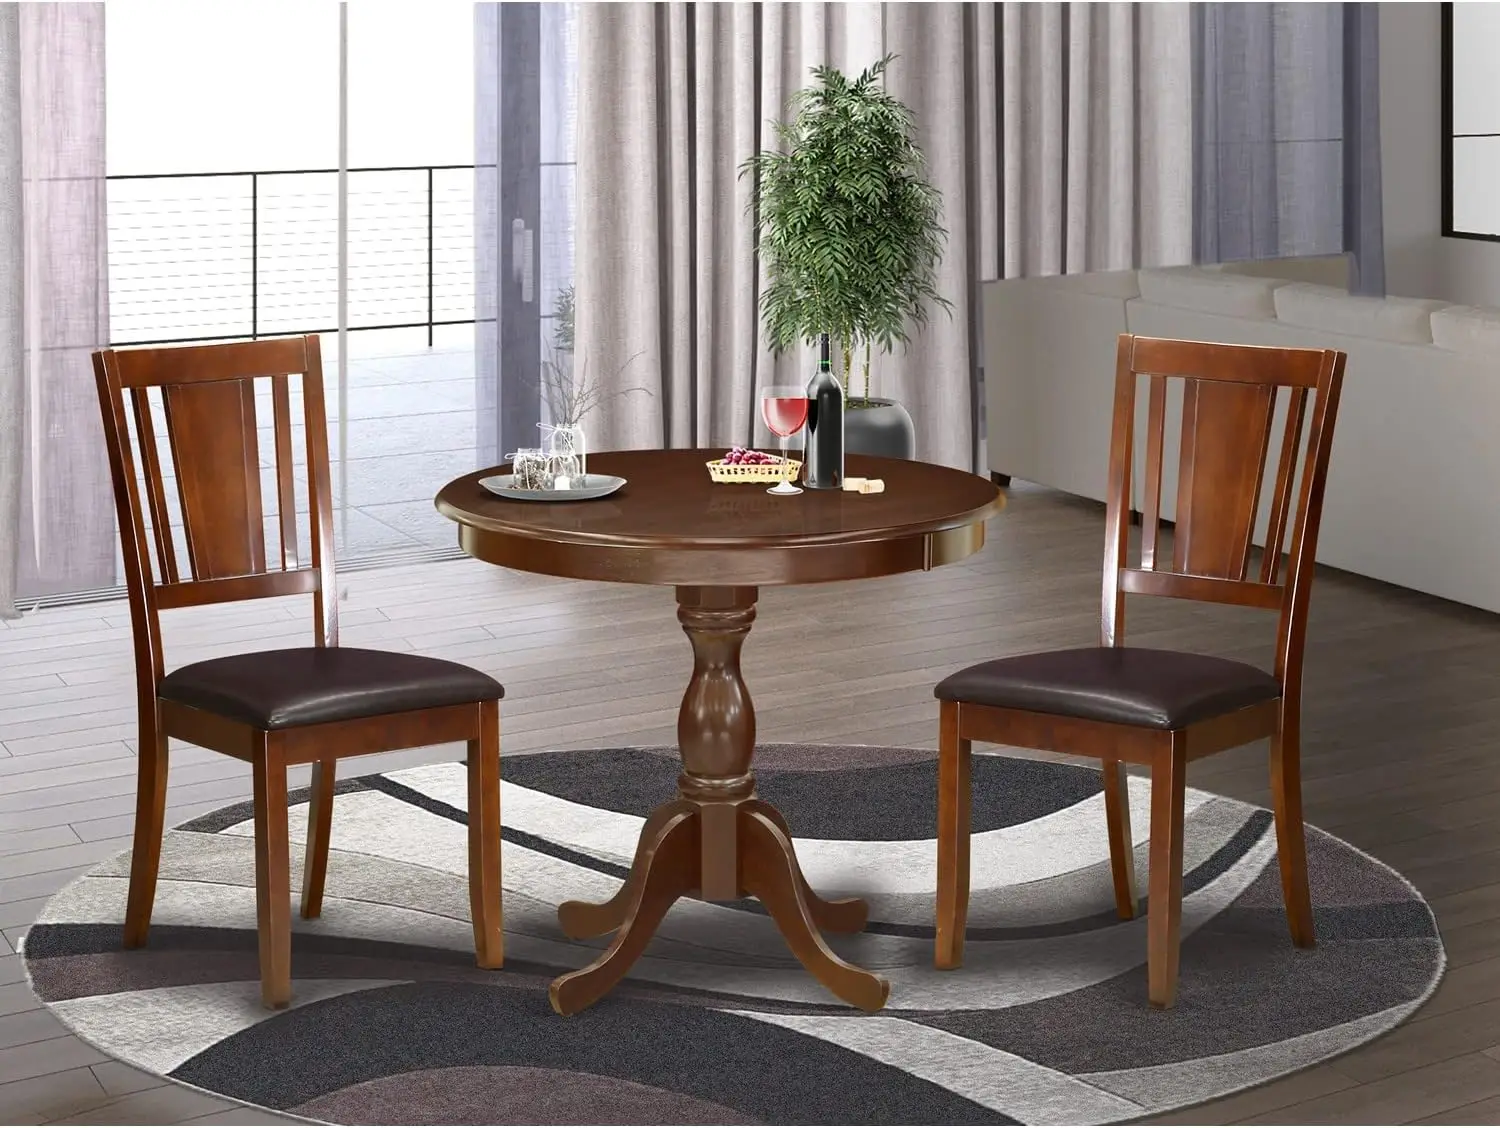 

East West Furniture Antique 3 Piece Modern Set Contains a Round Kitchen Table with Pedestal and 2 Faux Leather Dining Room